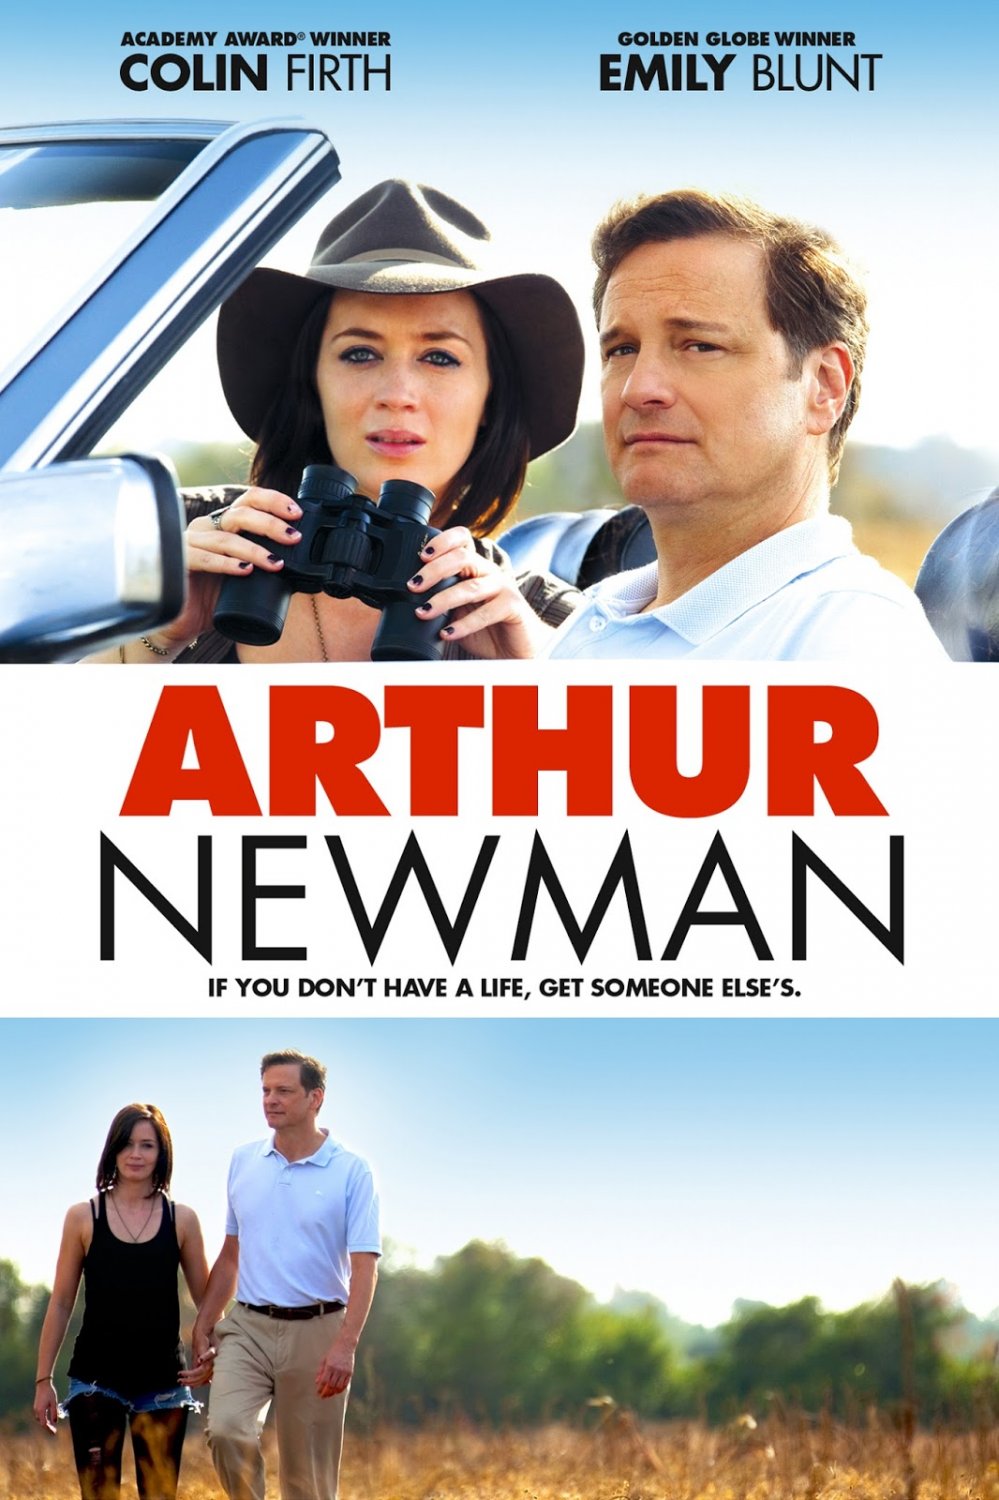 Arthur Newman Movie Poster 13x19 inches